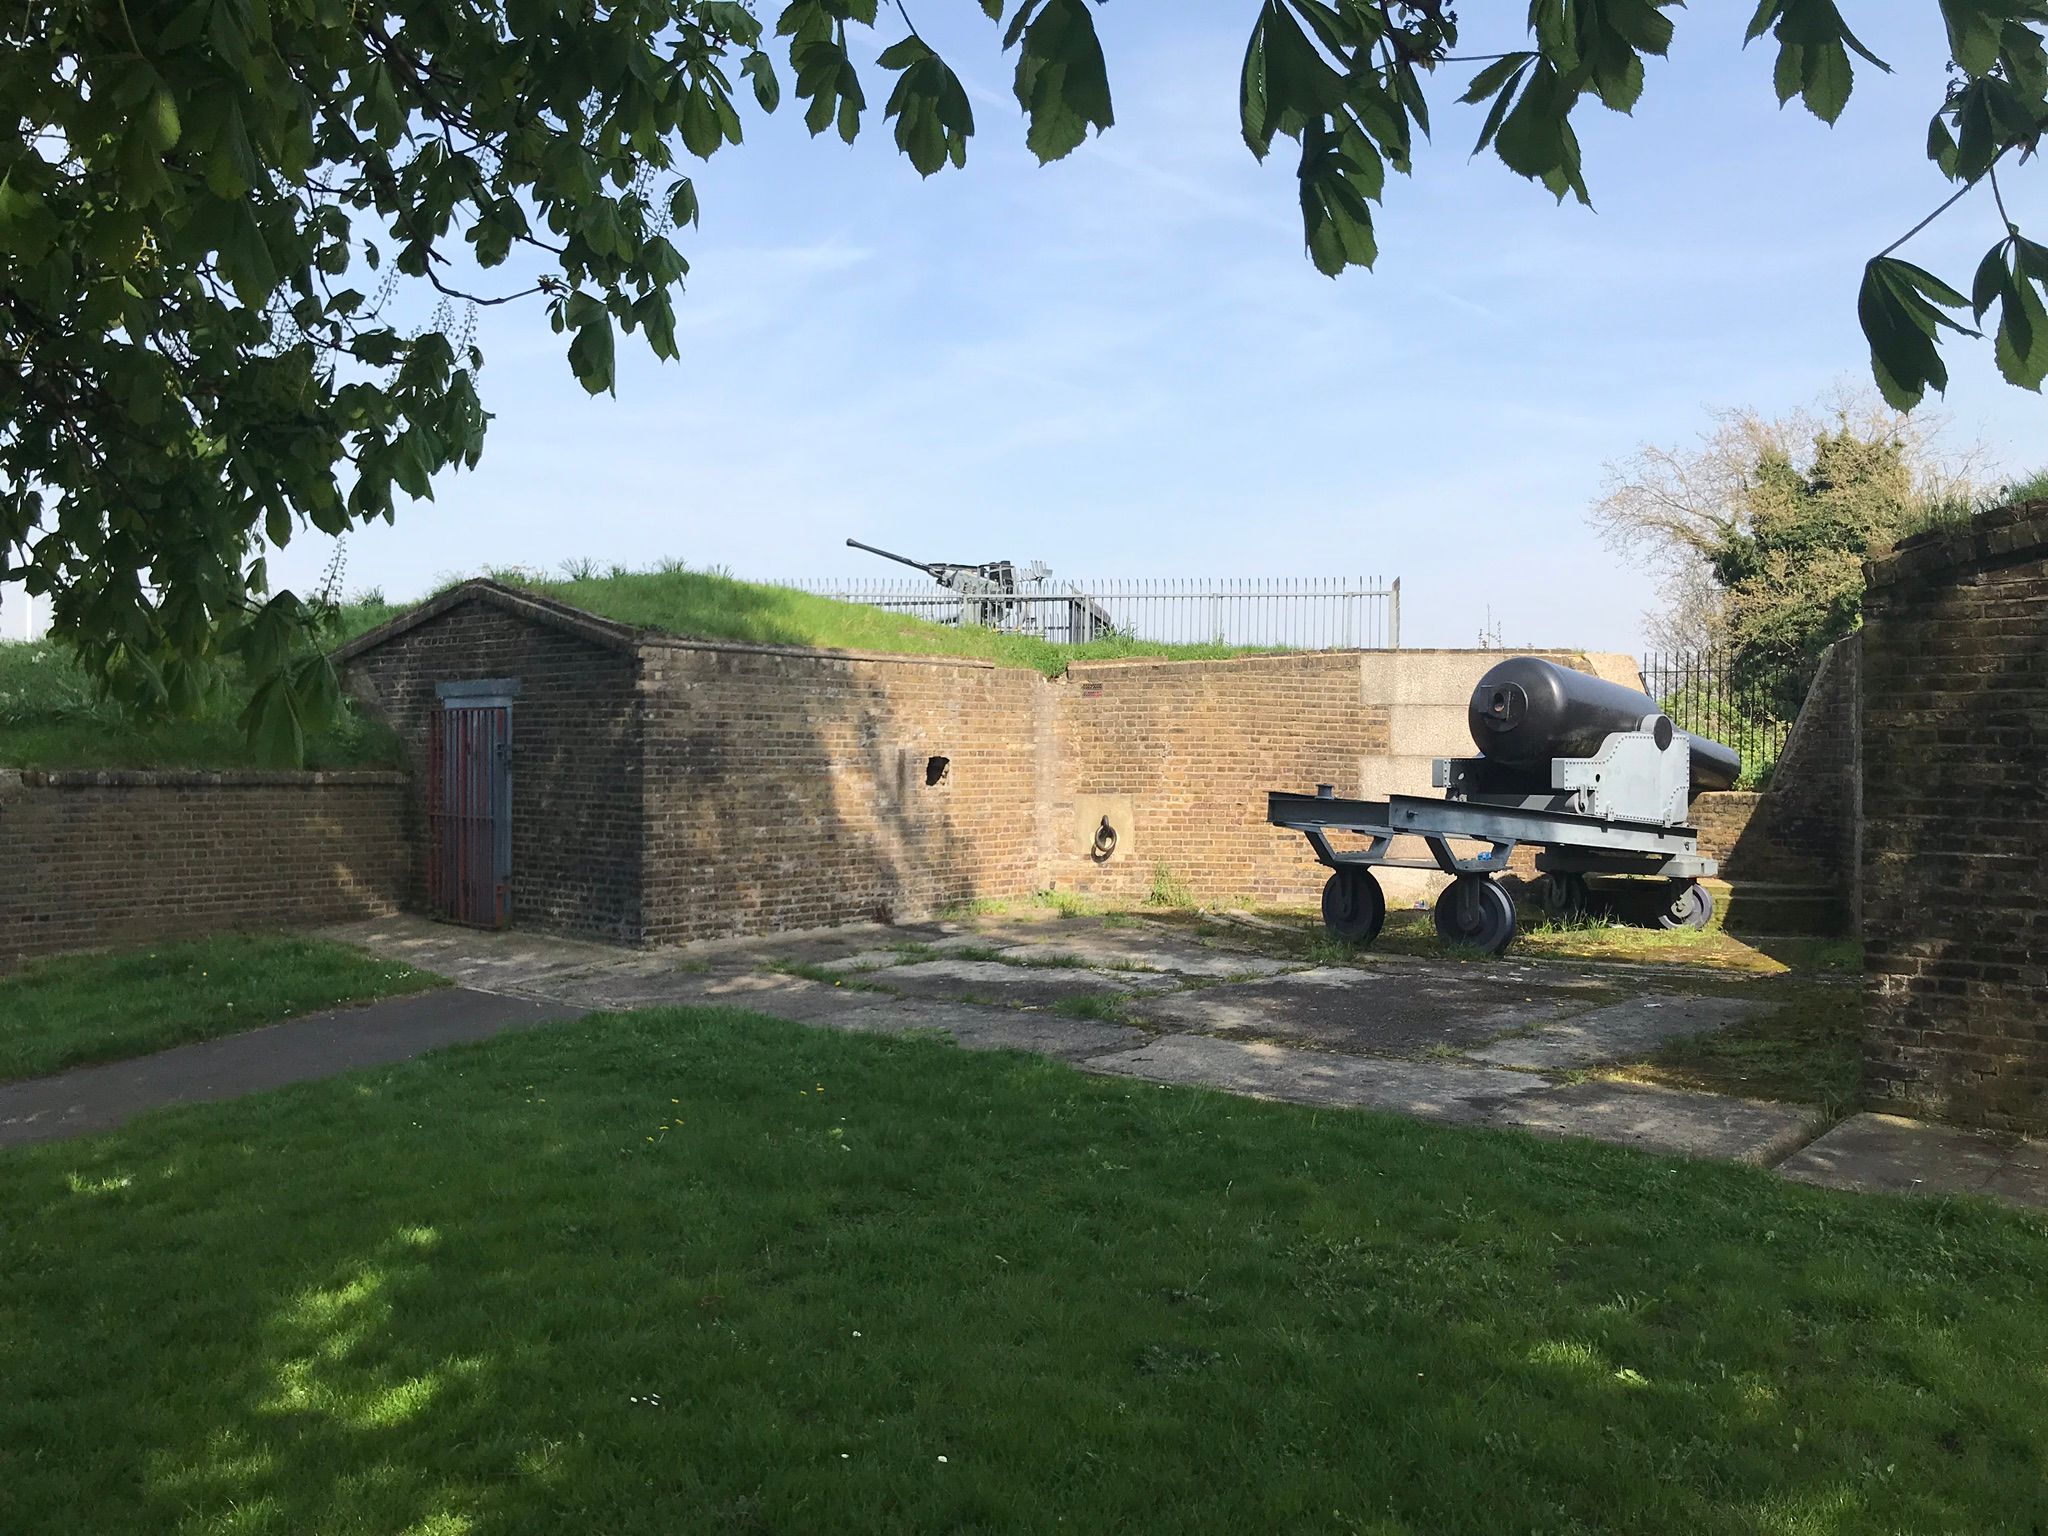 Cannon and anti-aircraft gun on the bank of the fort